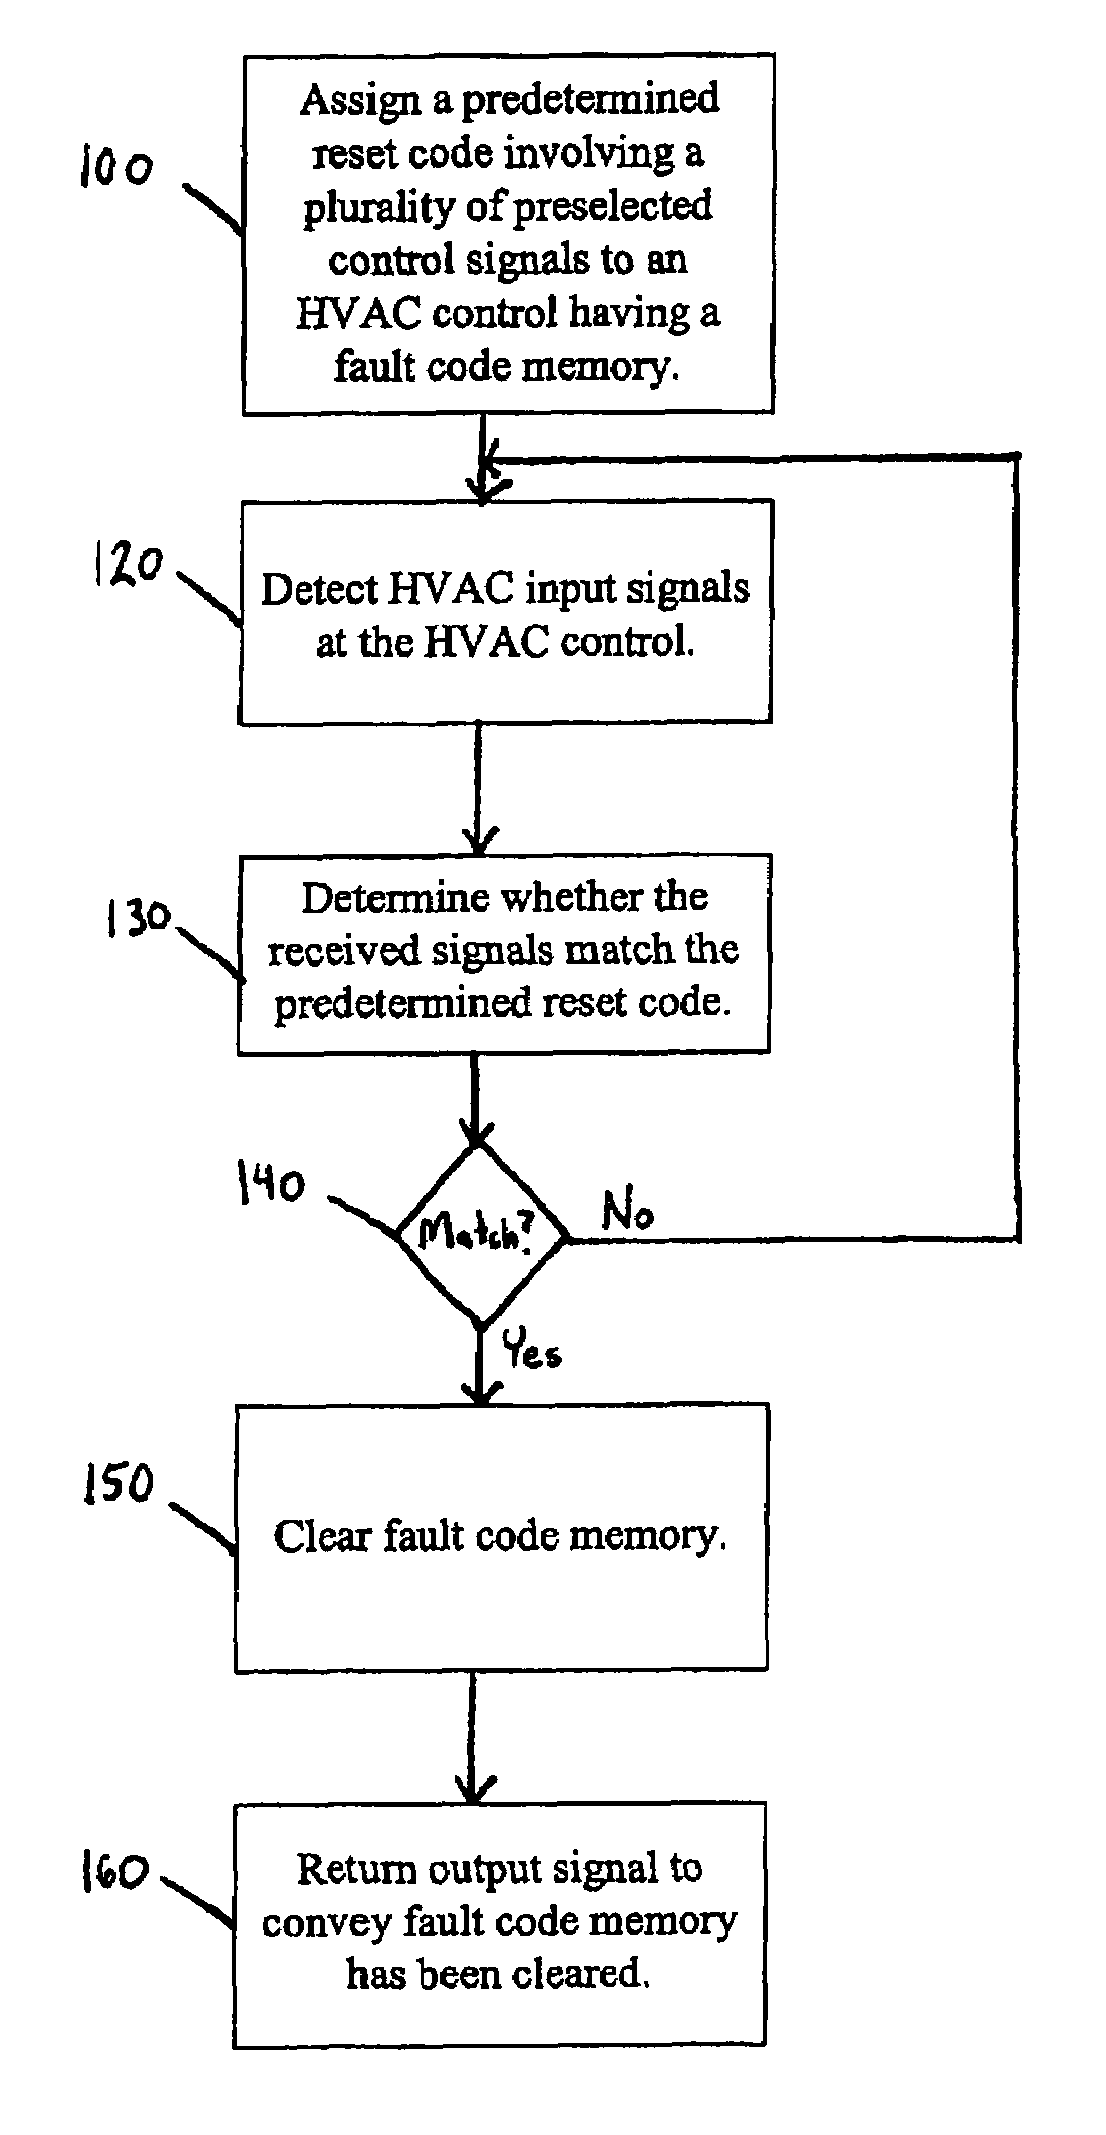 Method of clearing an HVAC control fault code memory